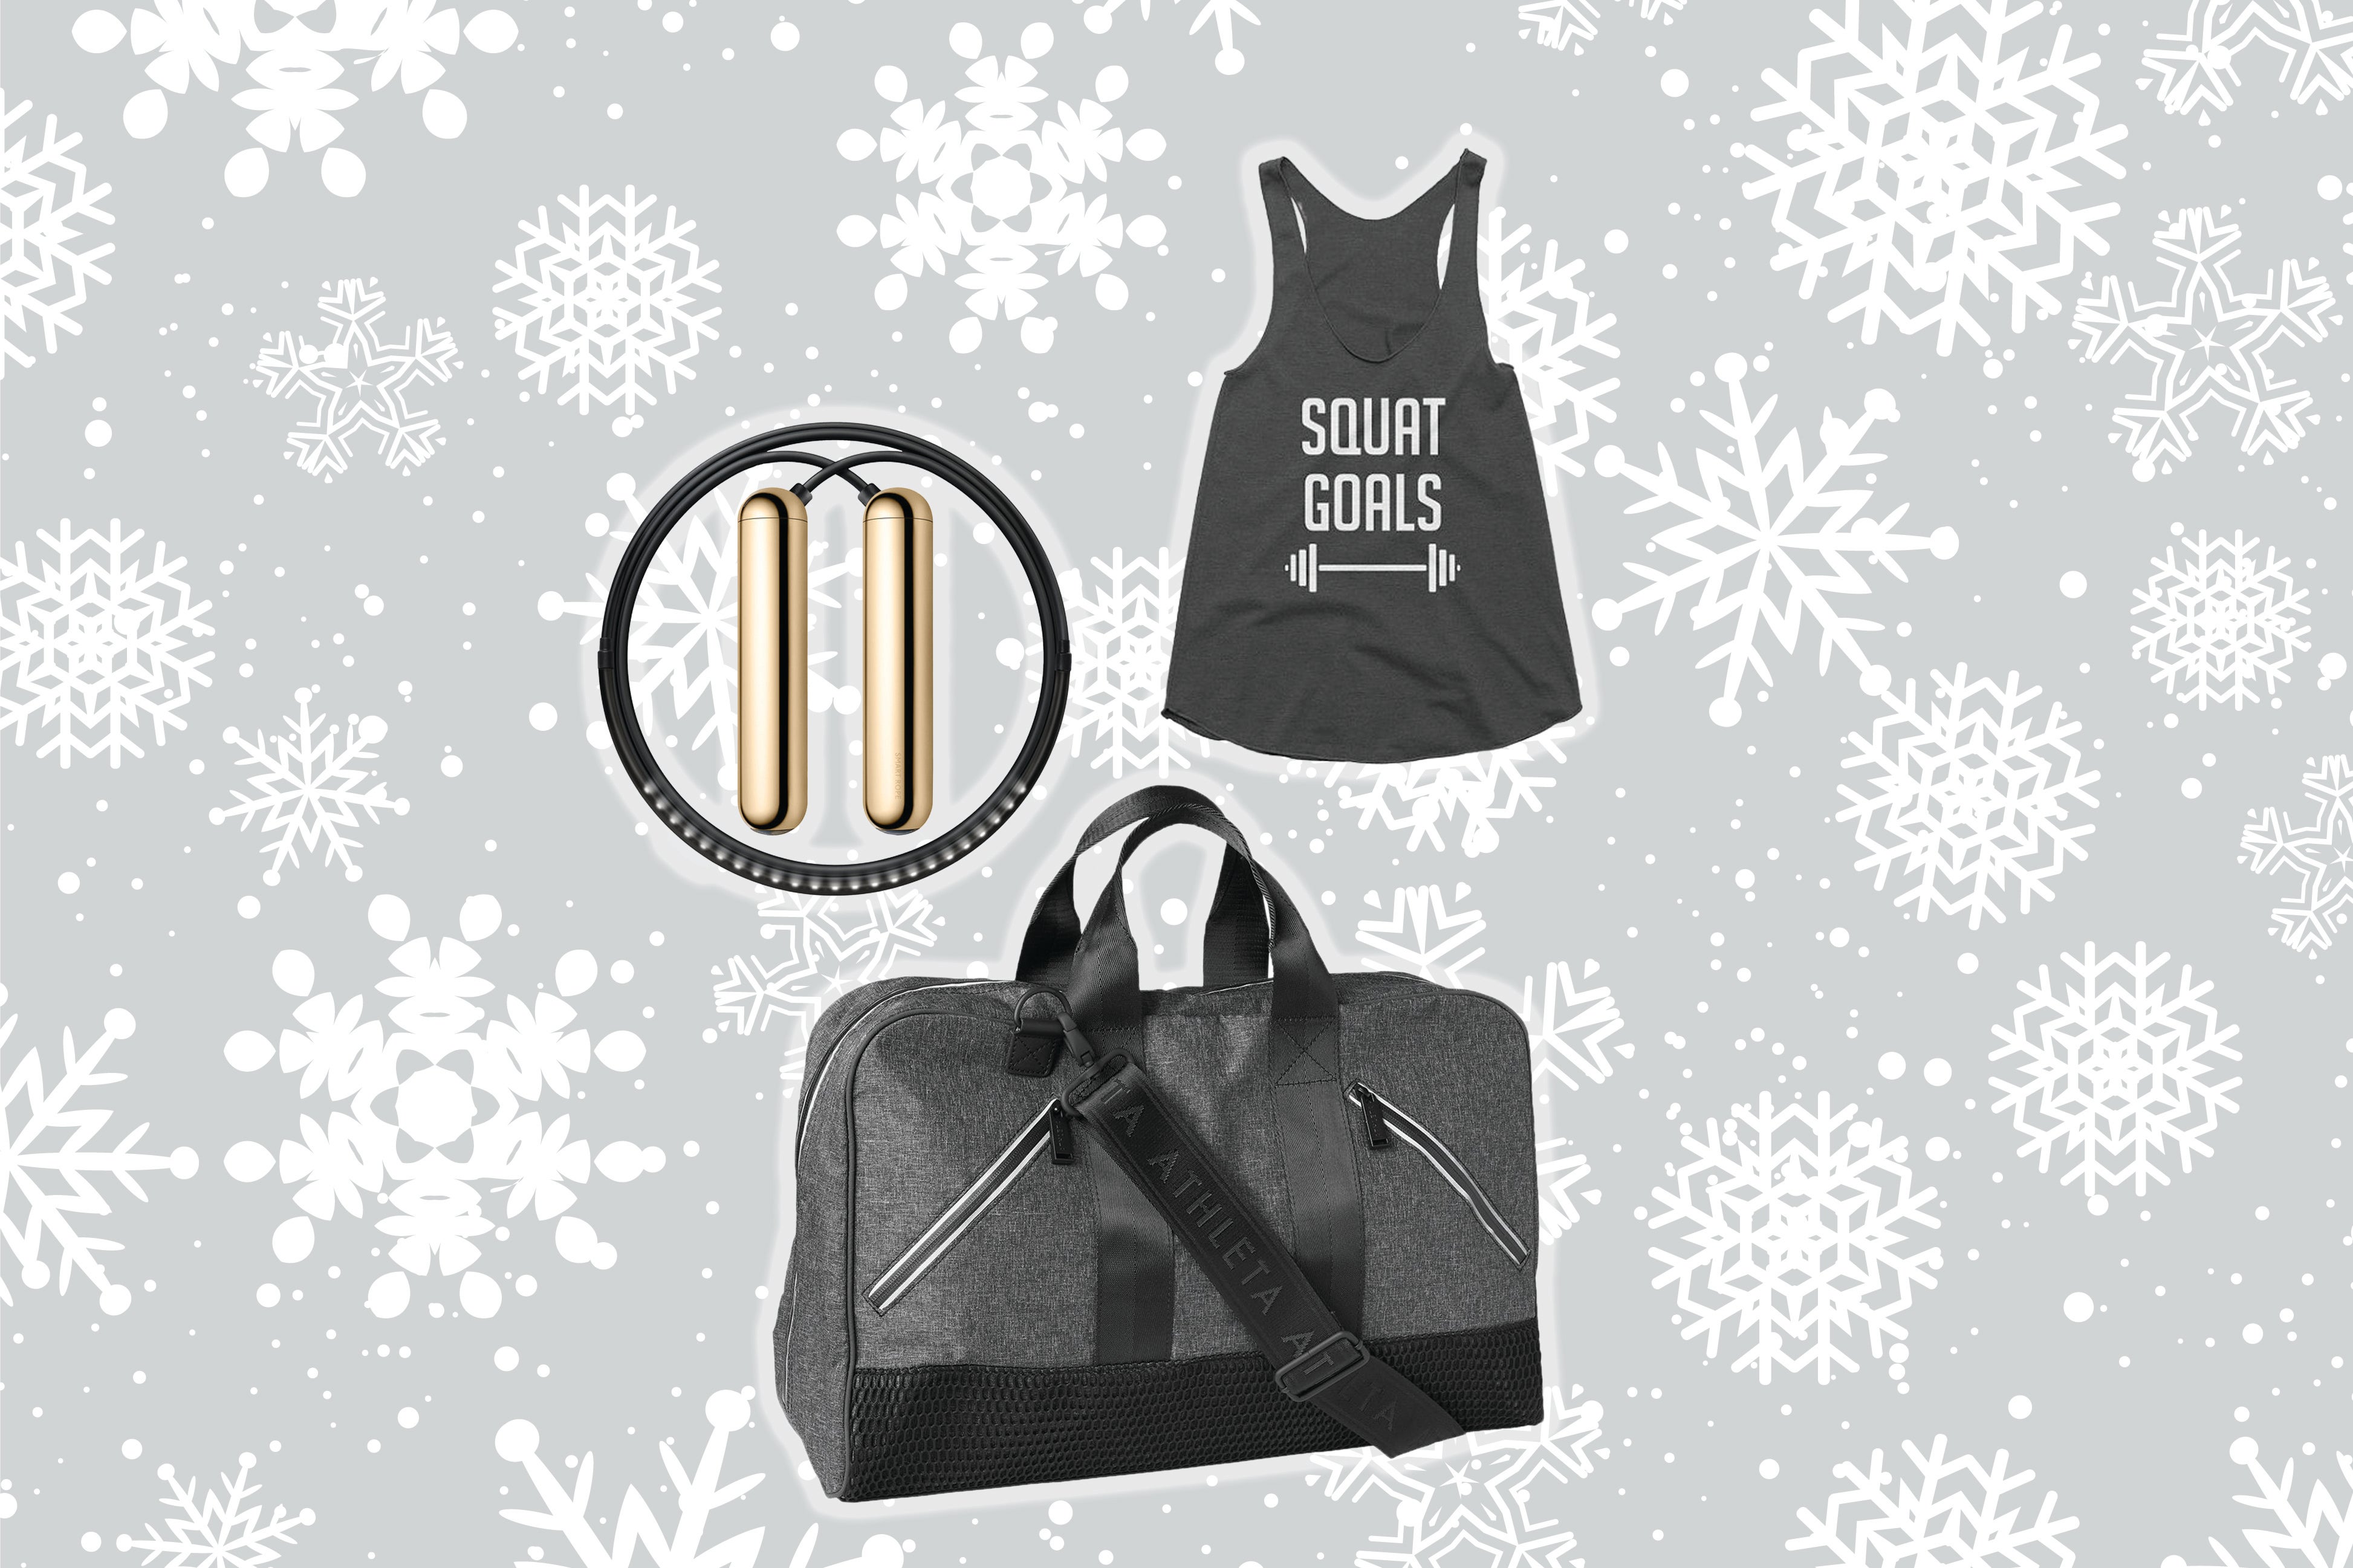 12 Gifts For The Girl Who Loves To Sweat In Style
